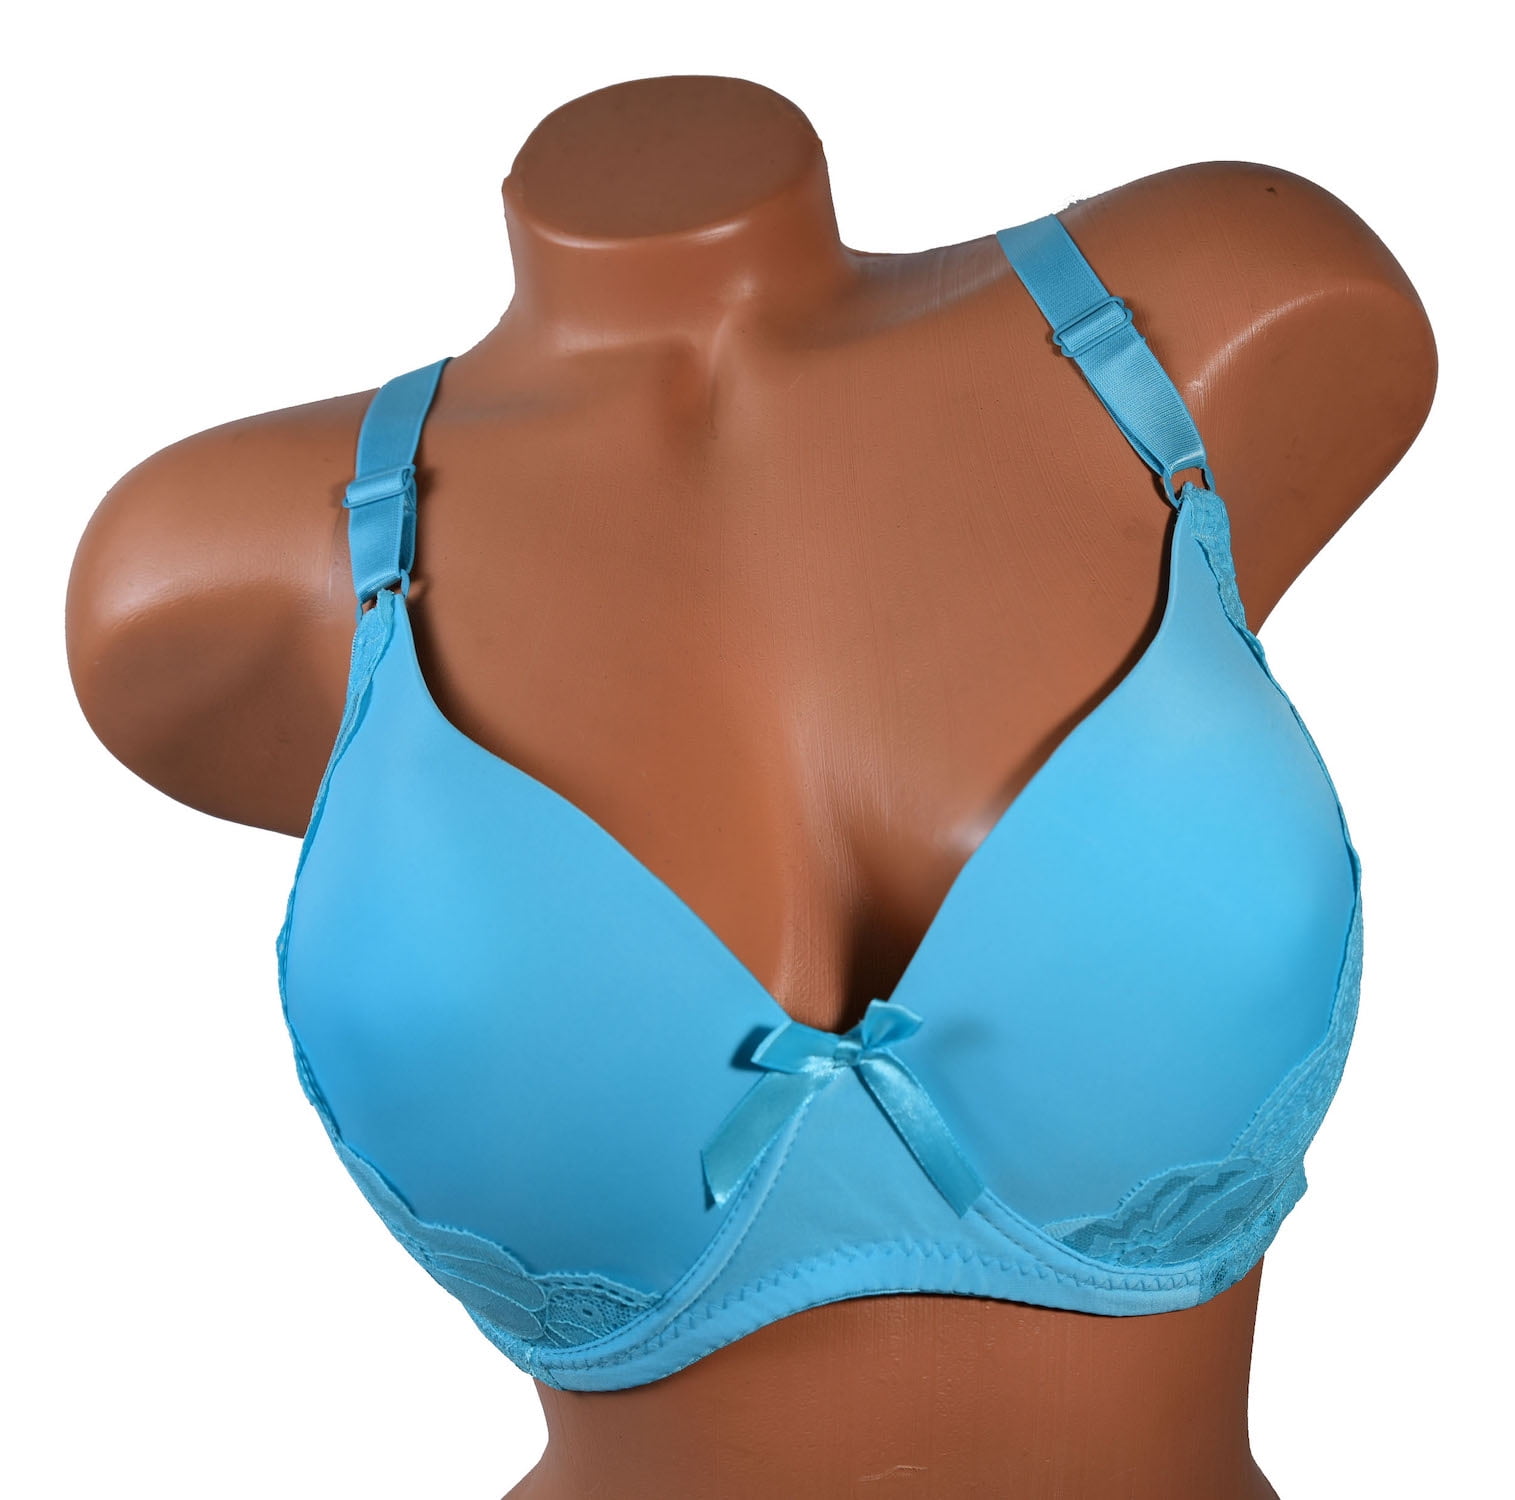 Women Bras 6 Pack of Bra D cup DD cup DDD cup Size 36D (F8203) 